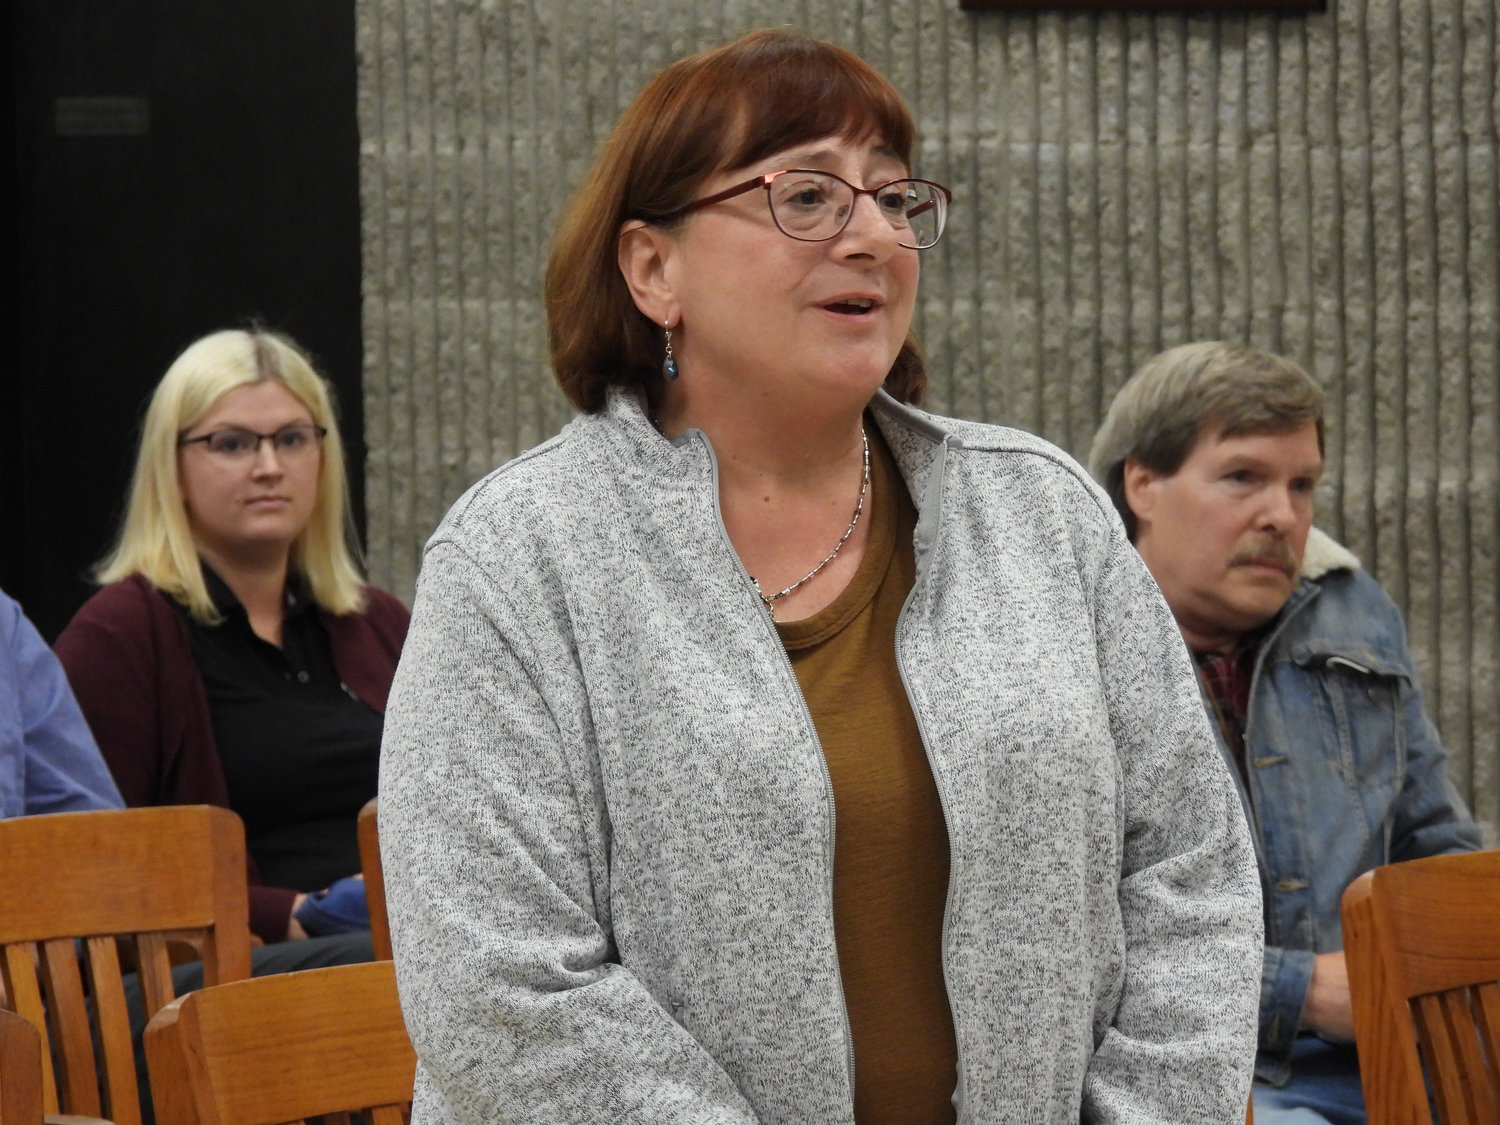 MEDICAL USE — Dee Schaefer, a 64-year-old resident of Oneida, talks about the benefits of medical marijuana and it being so close to Oneida at Monday’s public hearing.